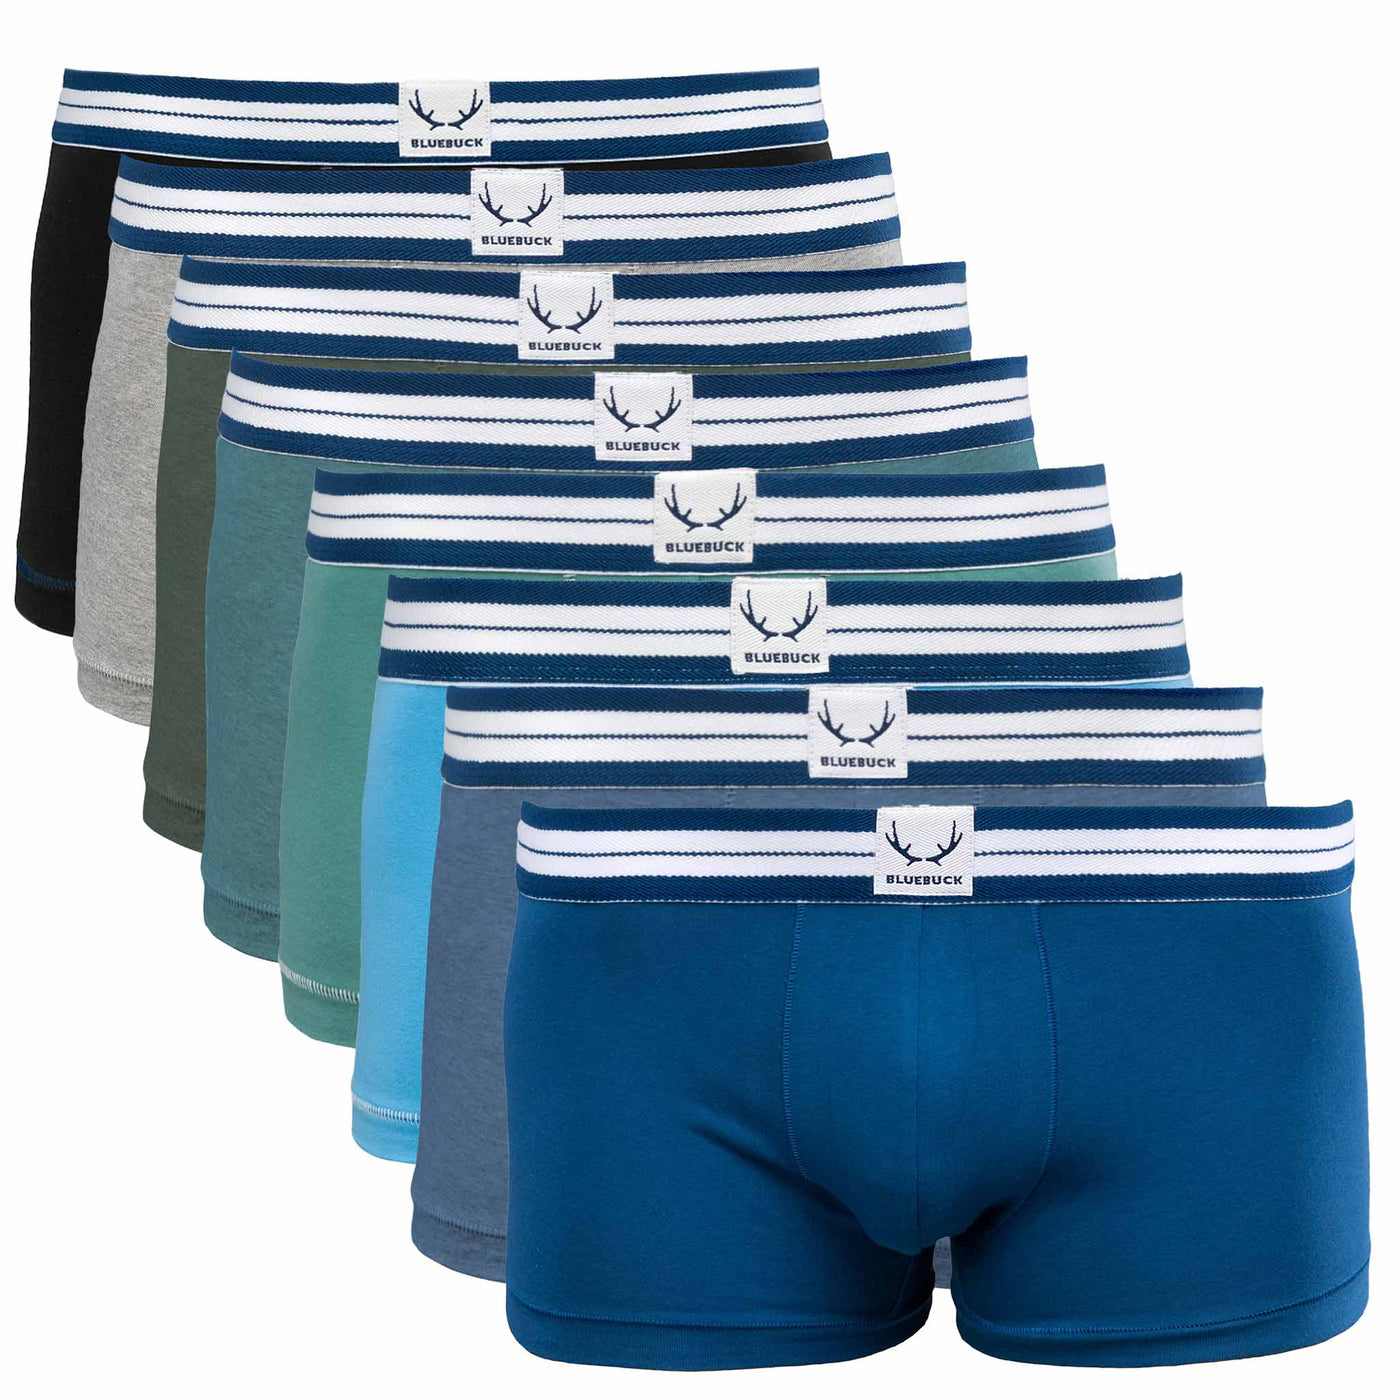 8 classic trunks for men, in organic cotton